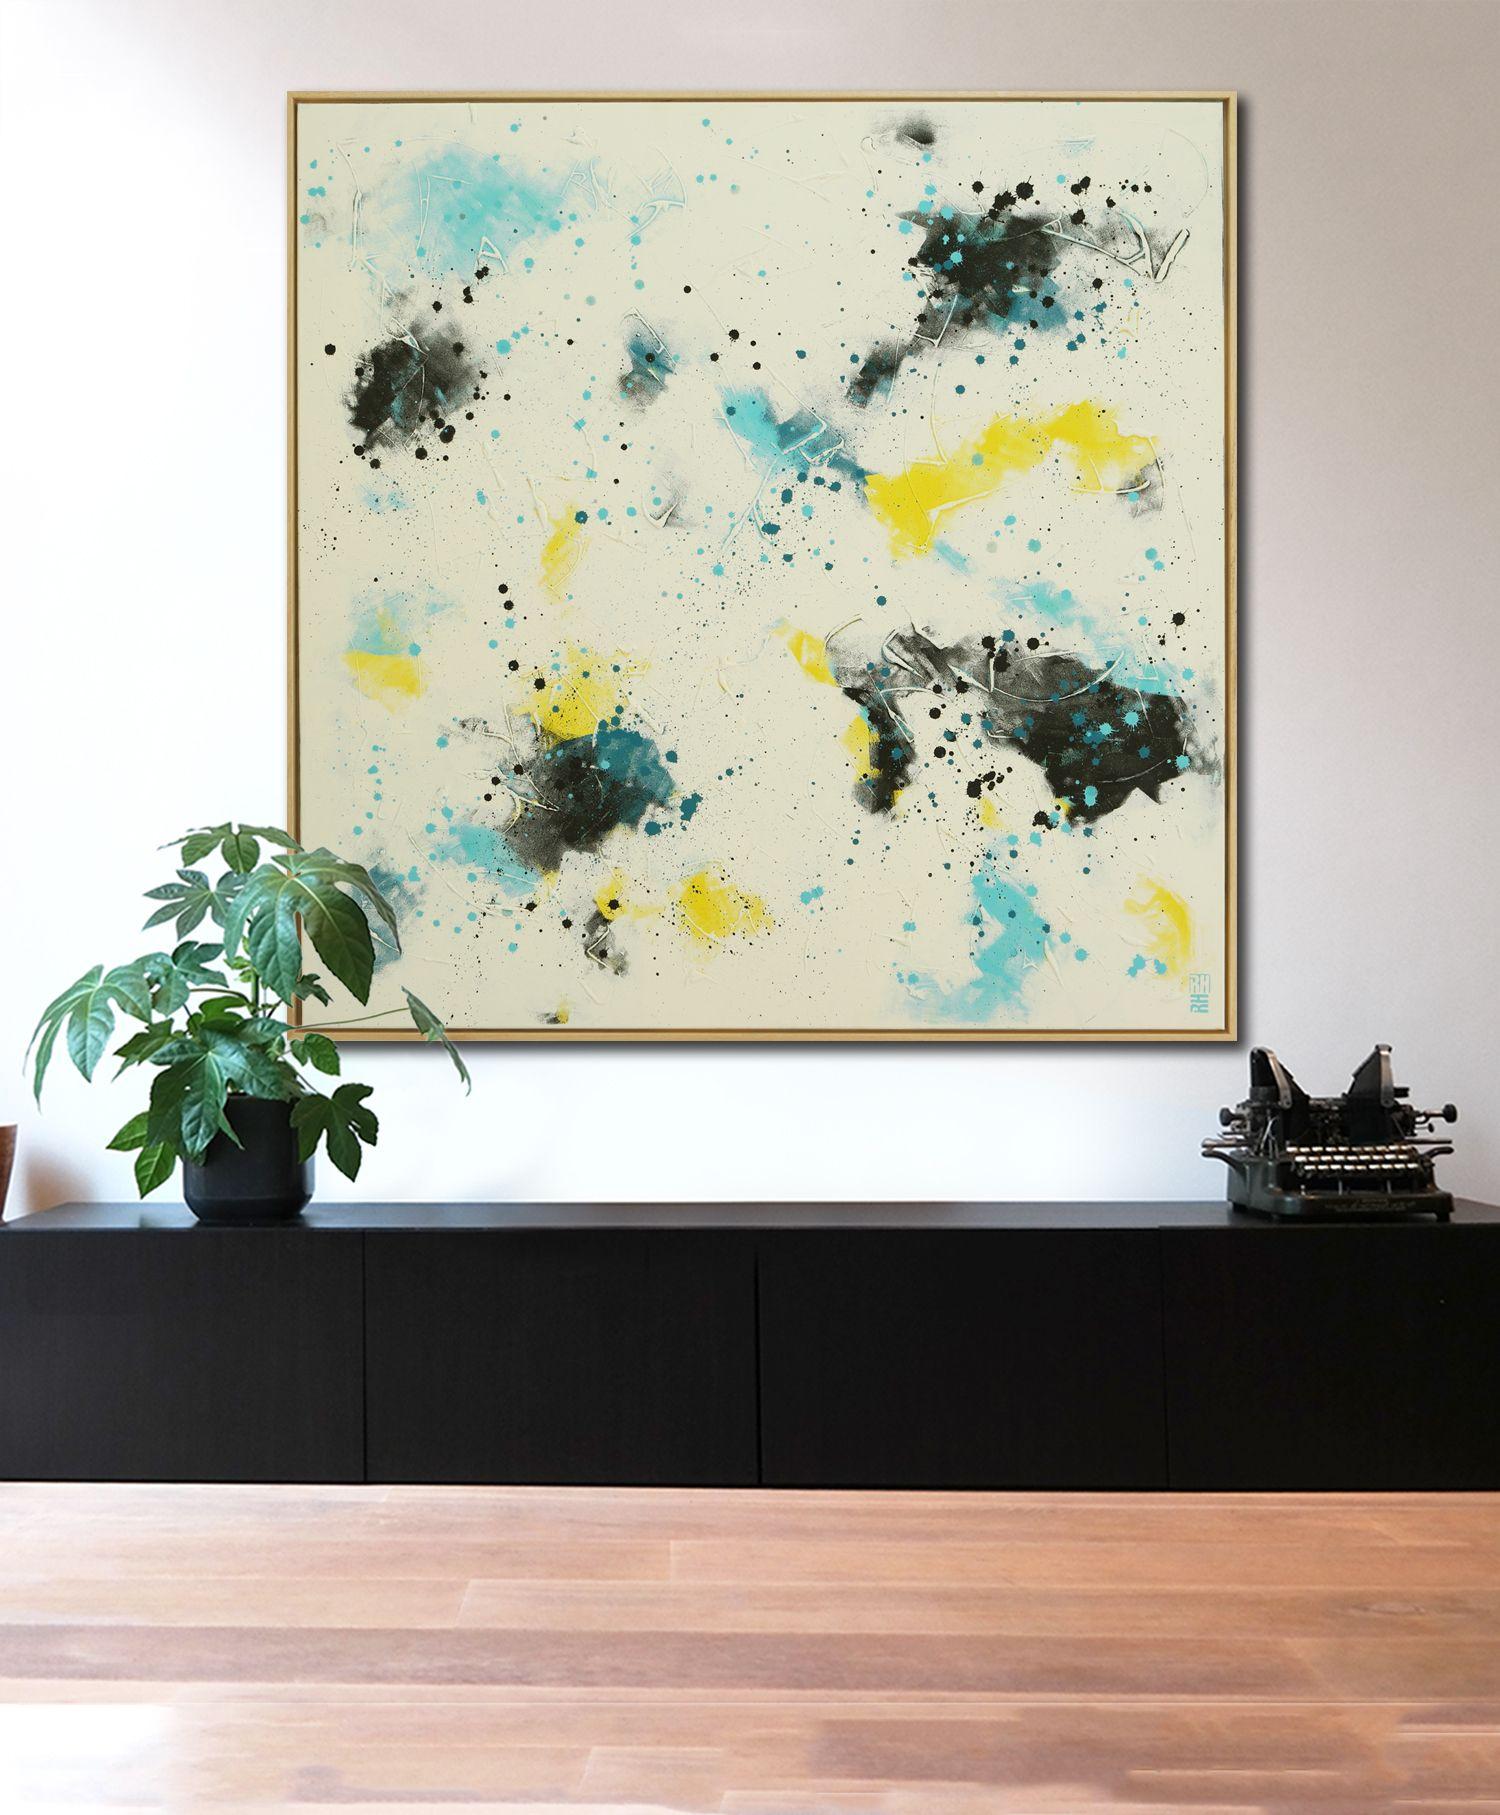 A minimalist design, primarily white, with hints of blue and yellow. With quick brush strokes and through multiple layers of paint and texture Ronald aims to create a sense of depth. This elegant artwork will complement your interior style.    This